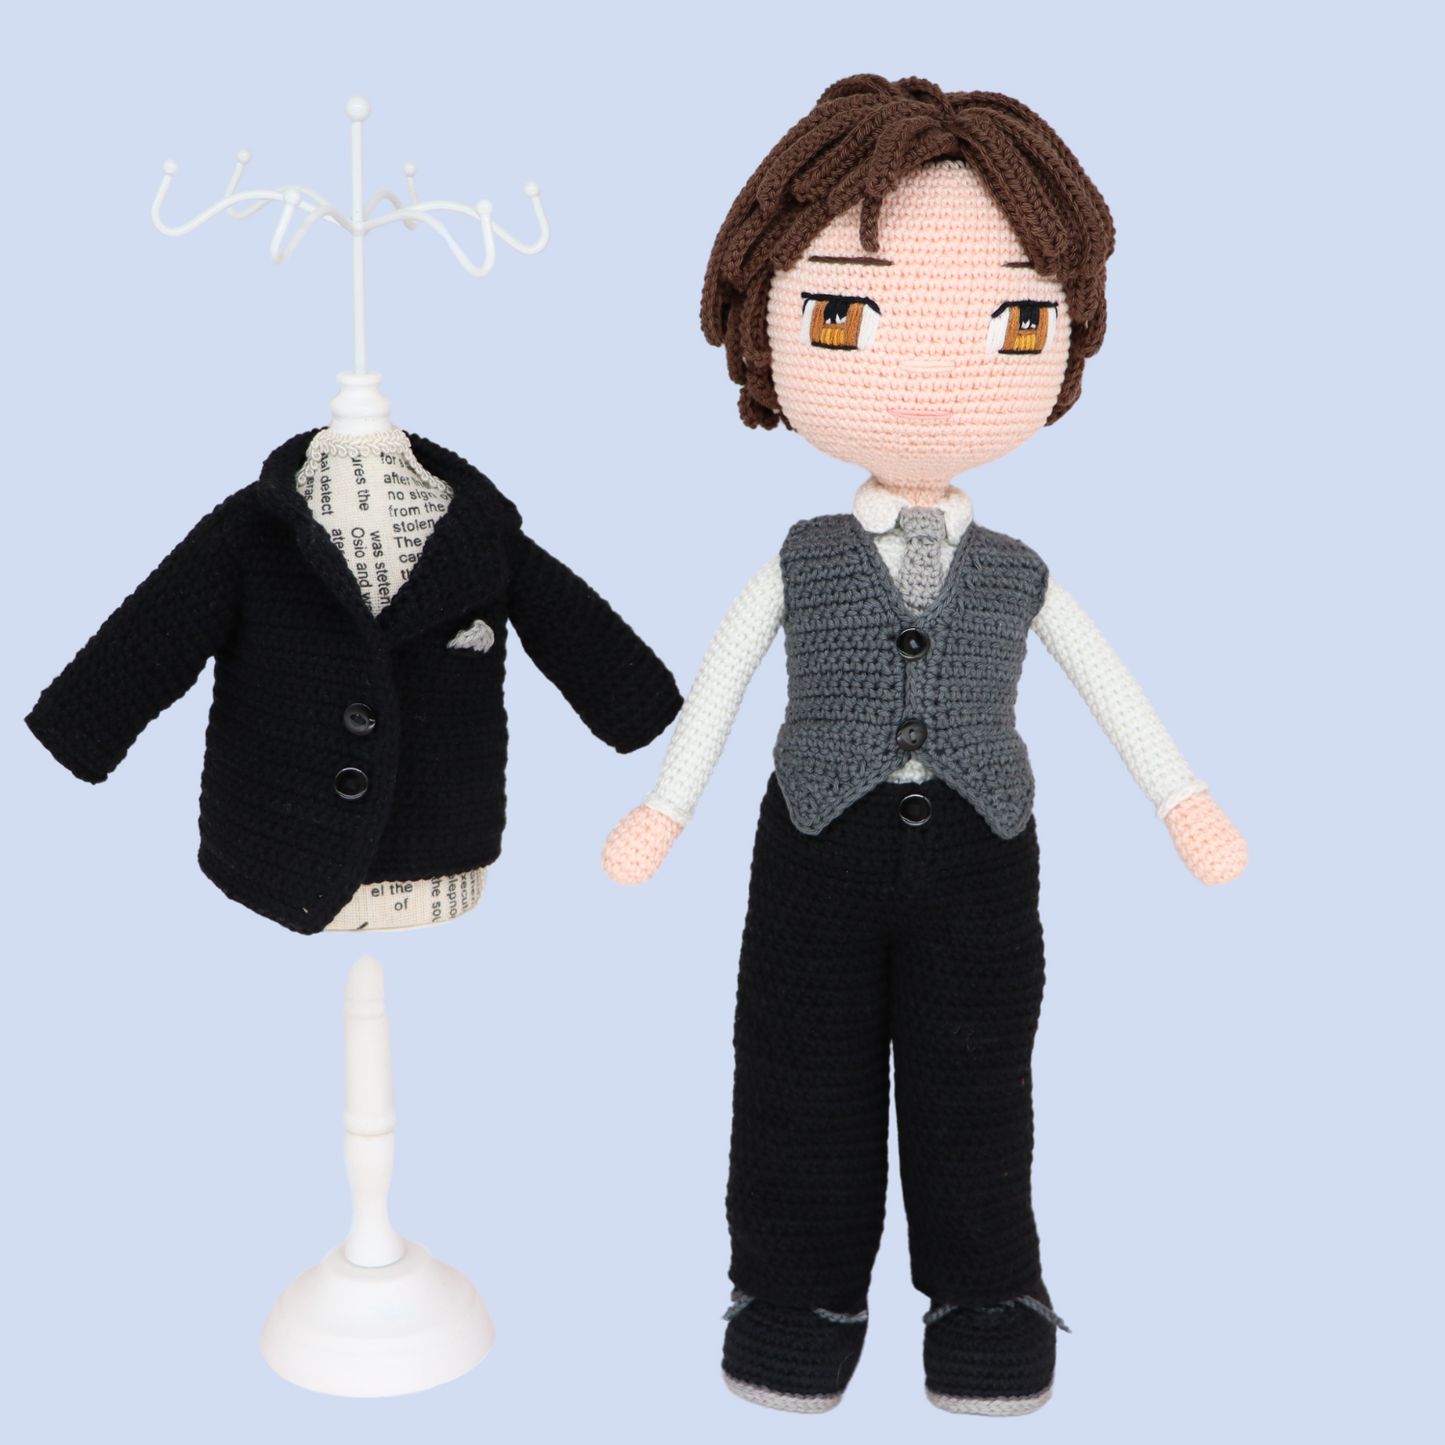 Ethan the Groom Doll Pattern